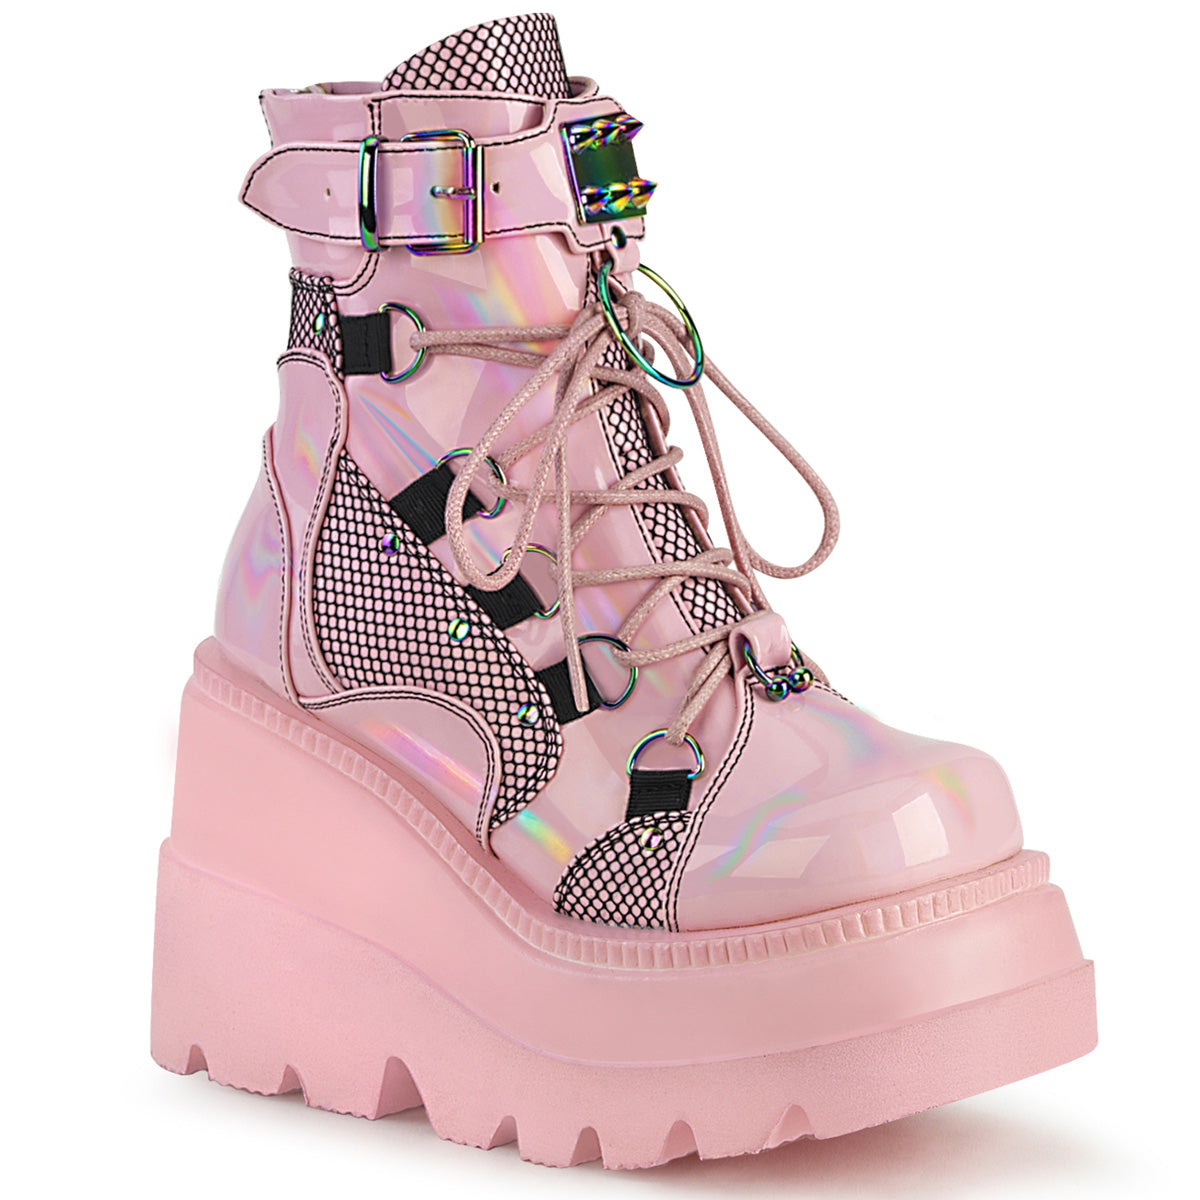 DemoniaCult Womens Ankle Boots SHAKER-60 Baby Pink Hologram